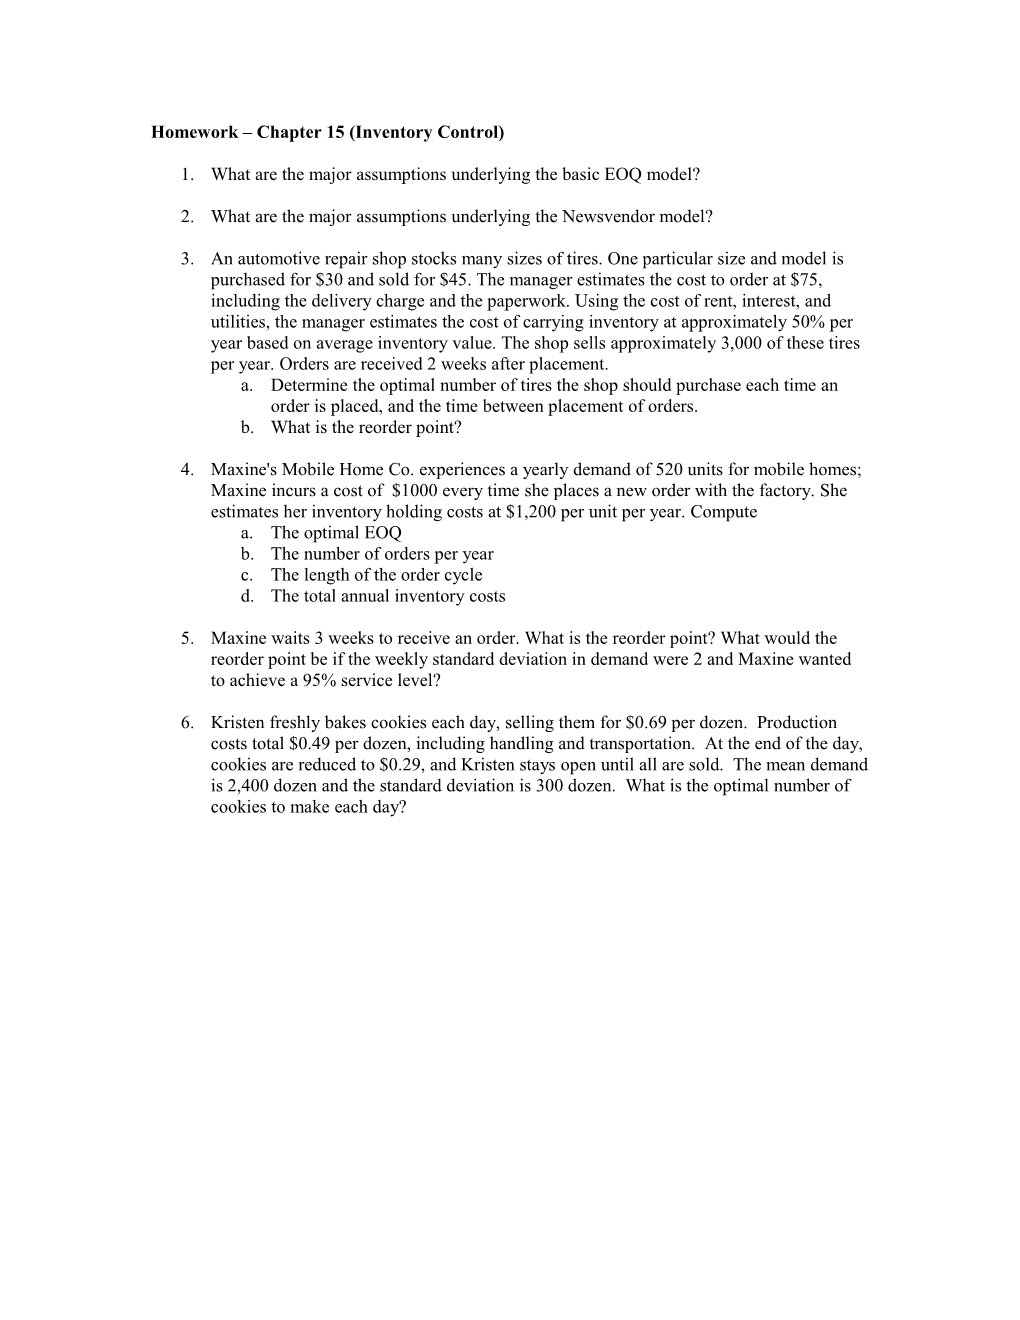 Homework Chapter 15 (Inventory Control)